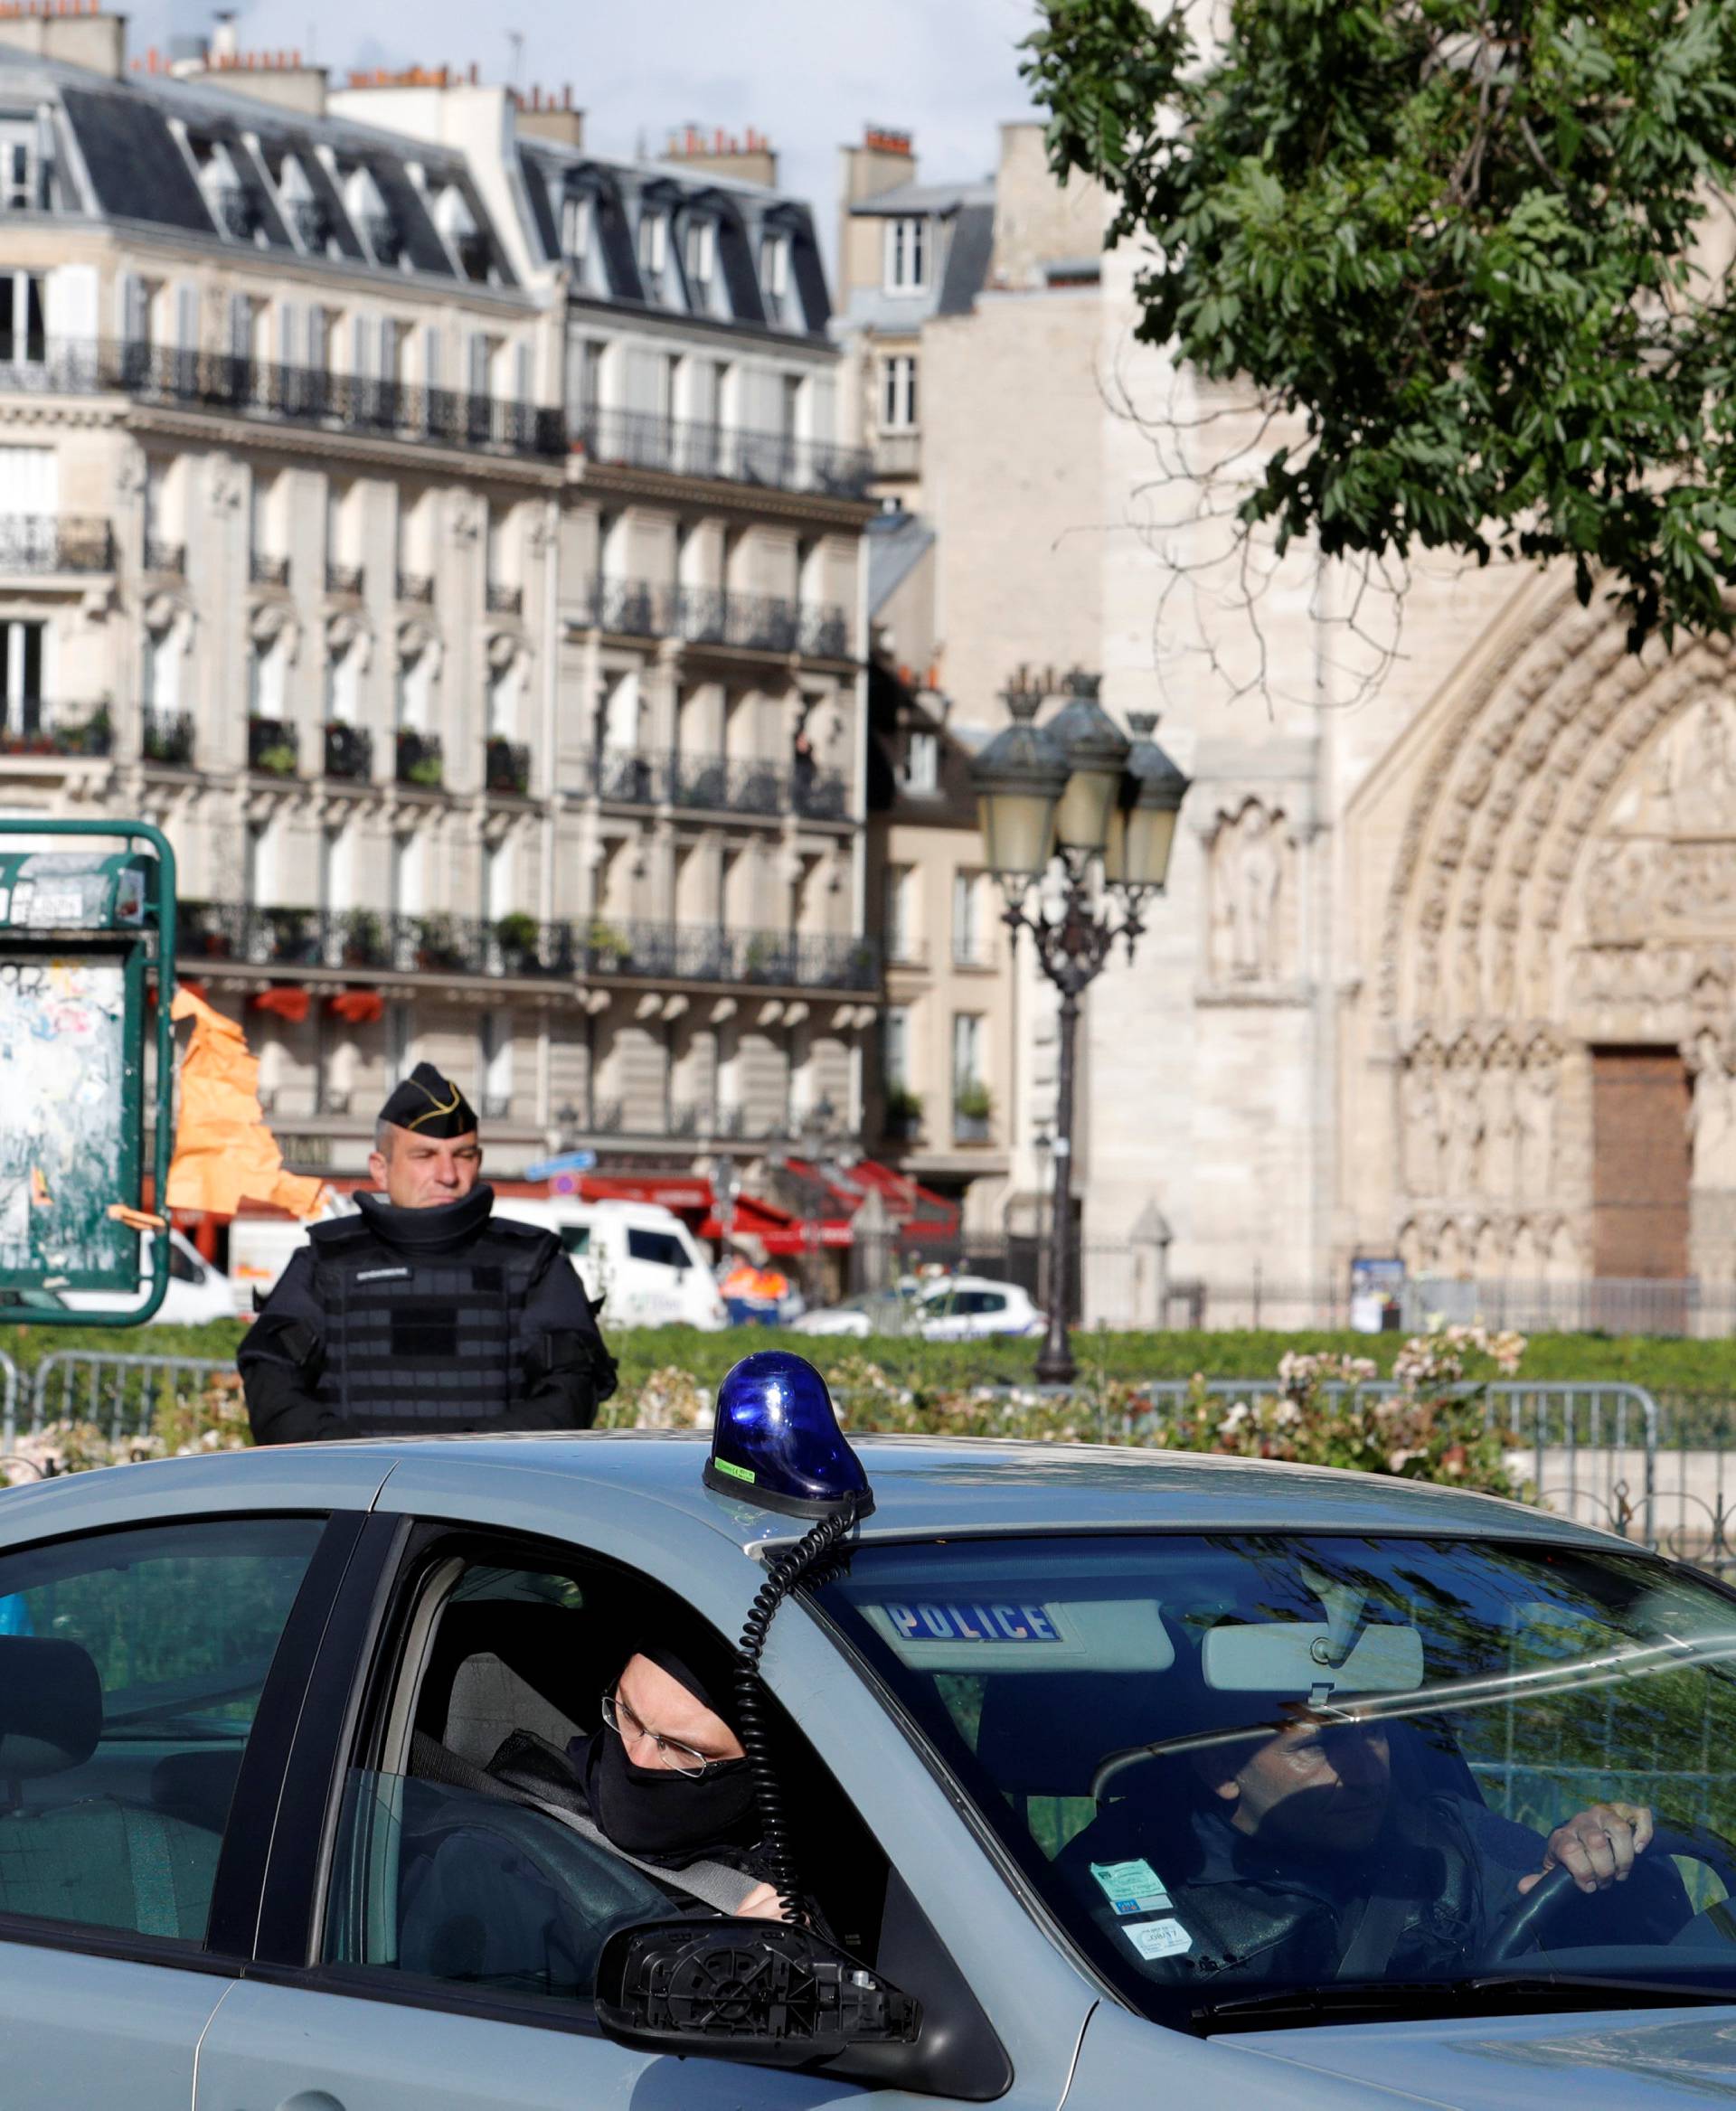 French police and gendarme stand at the scene of a shooting incident near the Notre Dame Cathedral in Paris